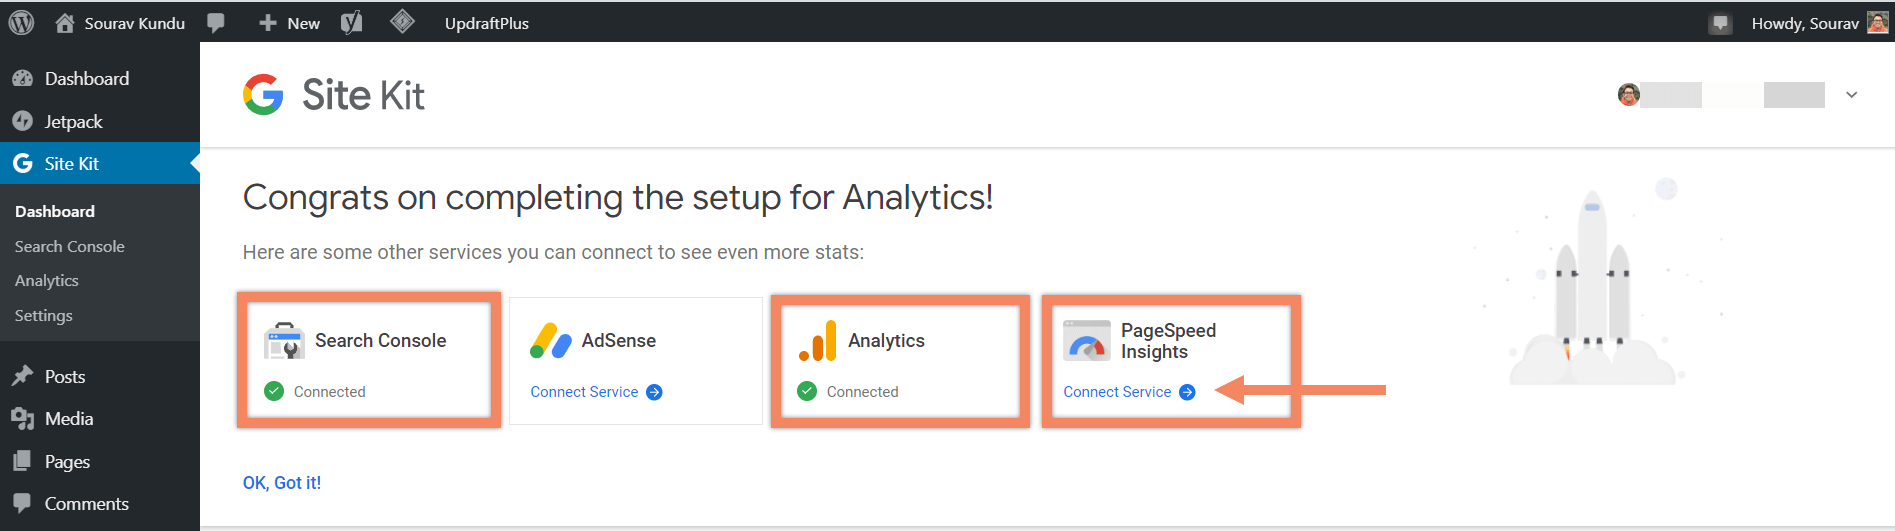 how to link google site kit and google analytics 4 success pagespeed